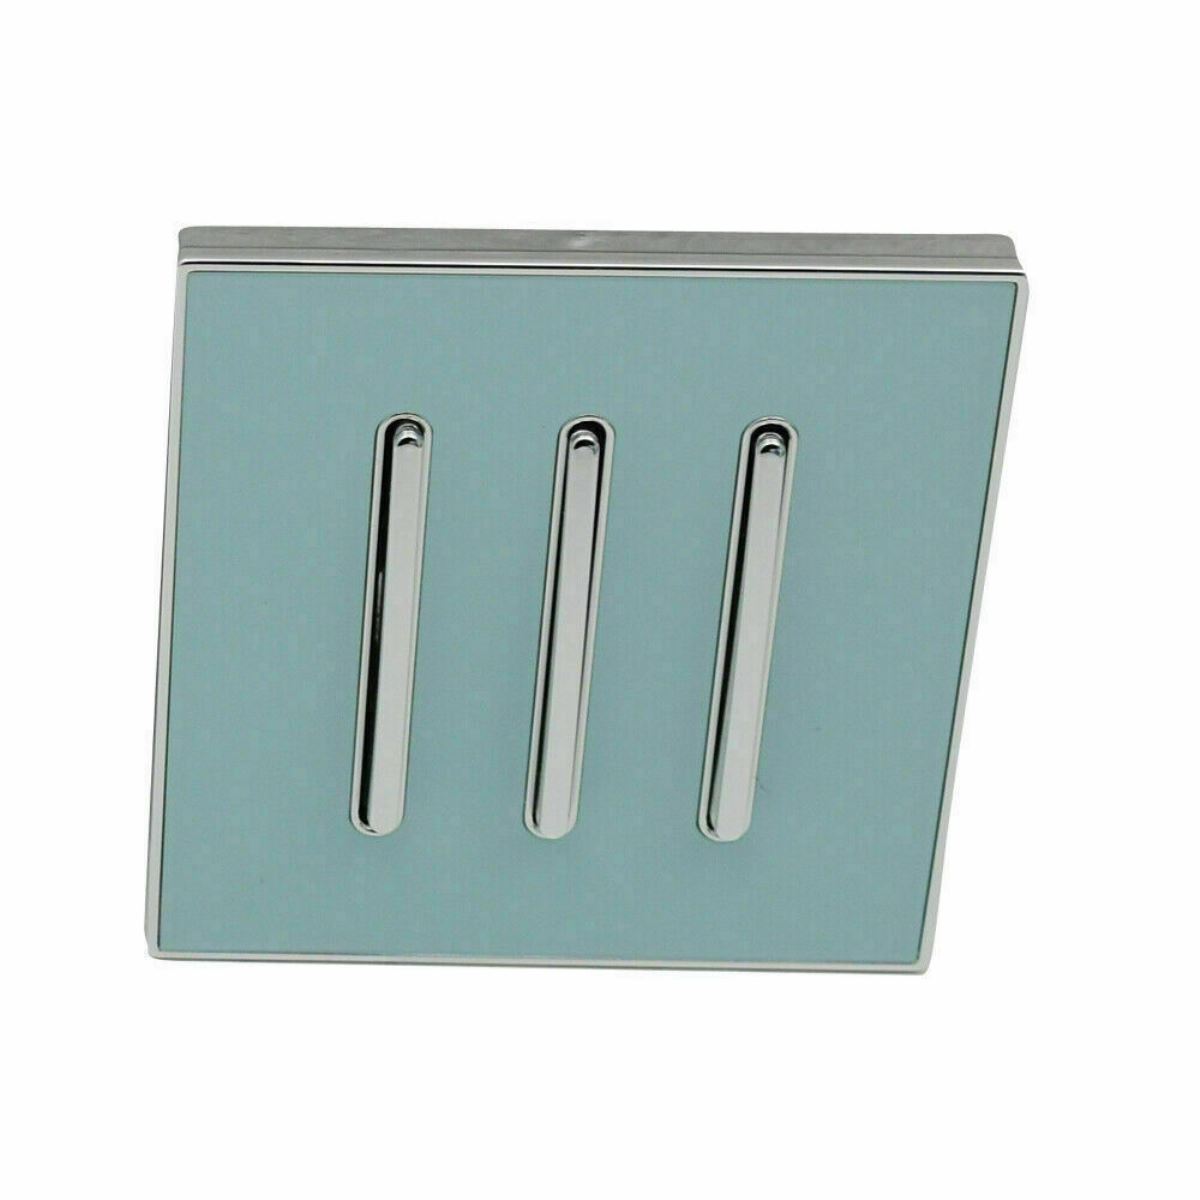 Screw less Wall Light 3 Gang Blue Glossy Switch - Vintagelite